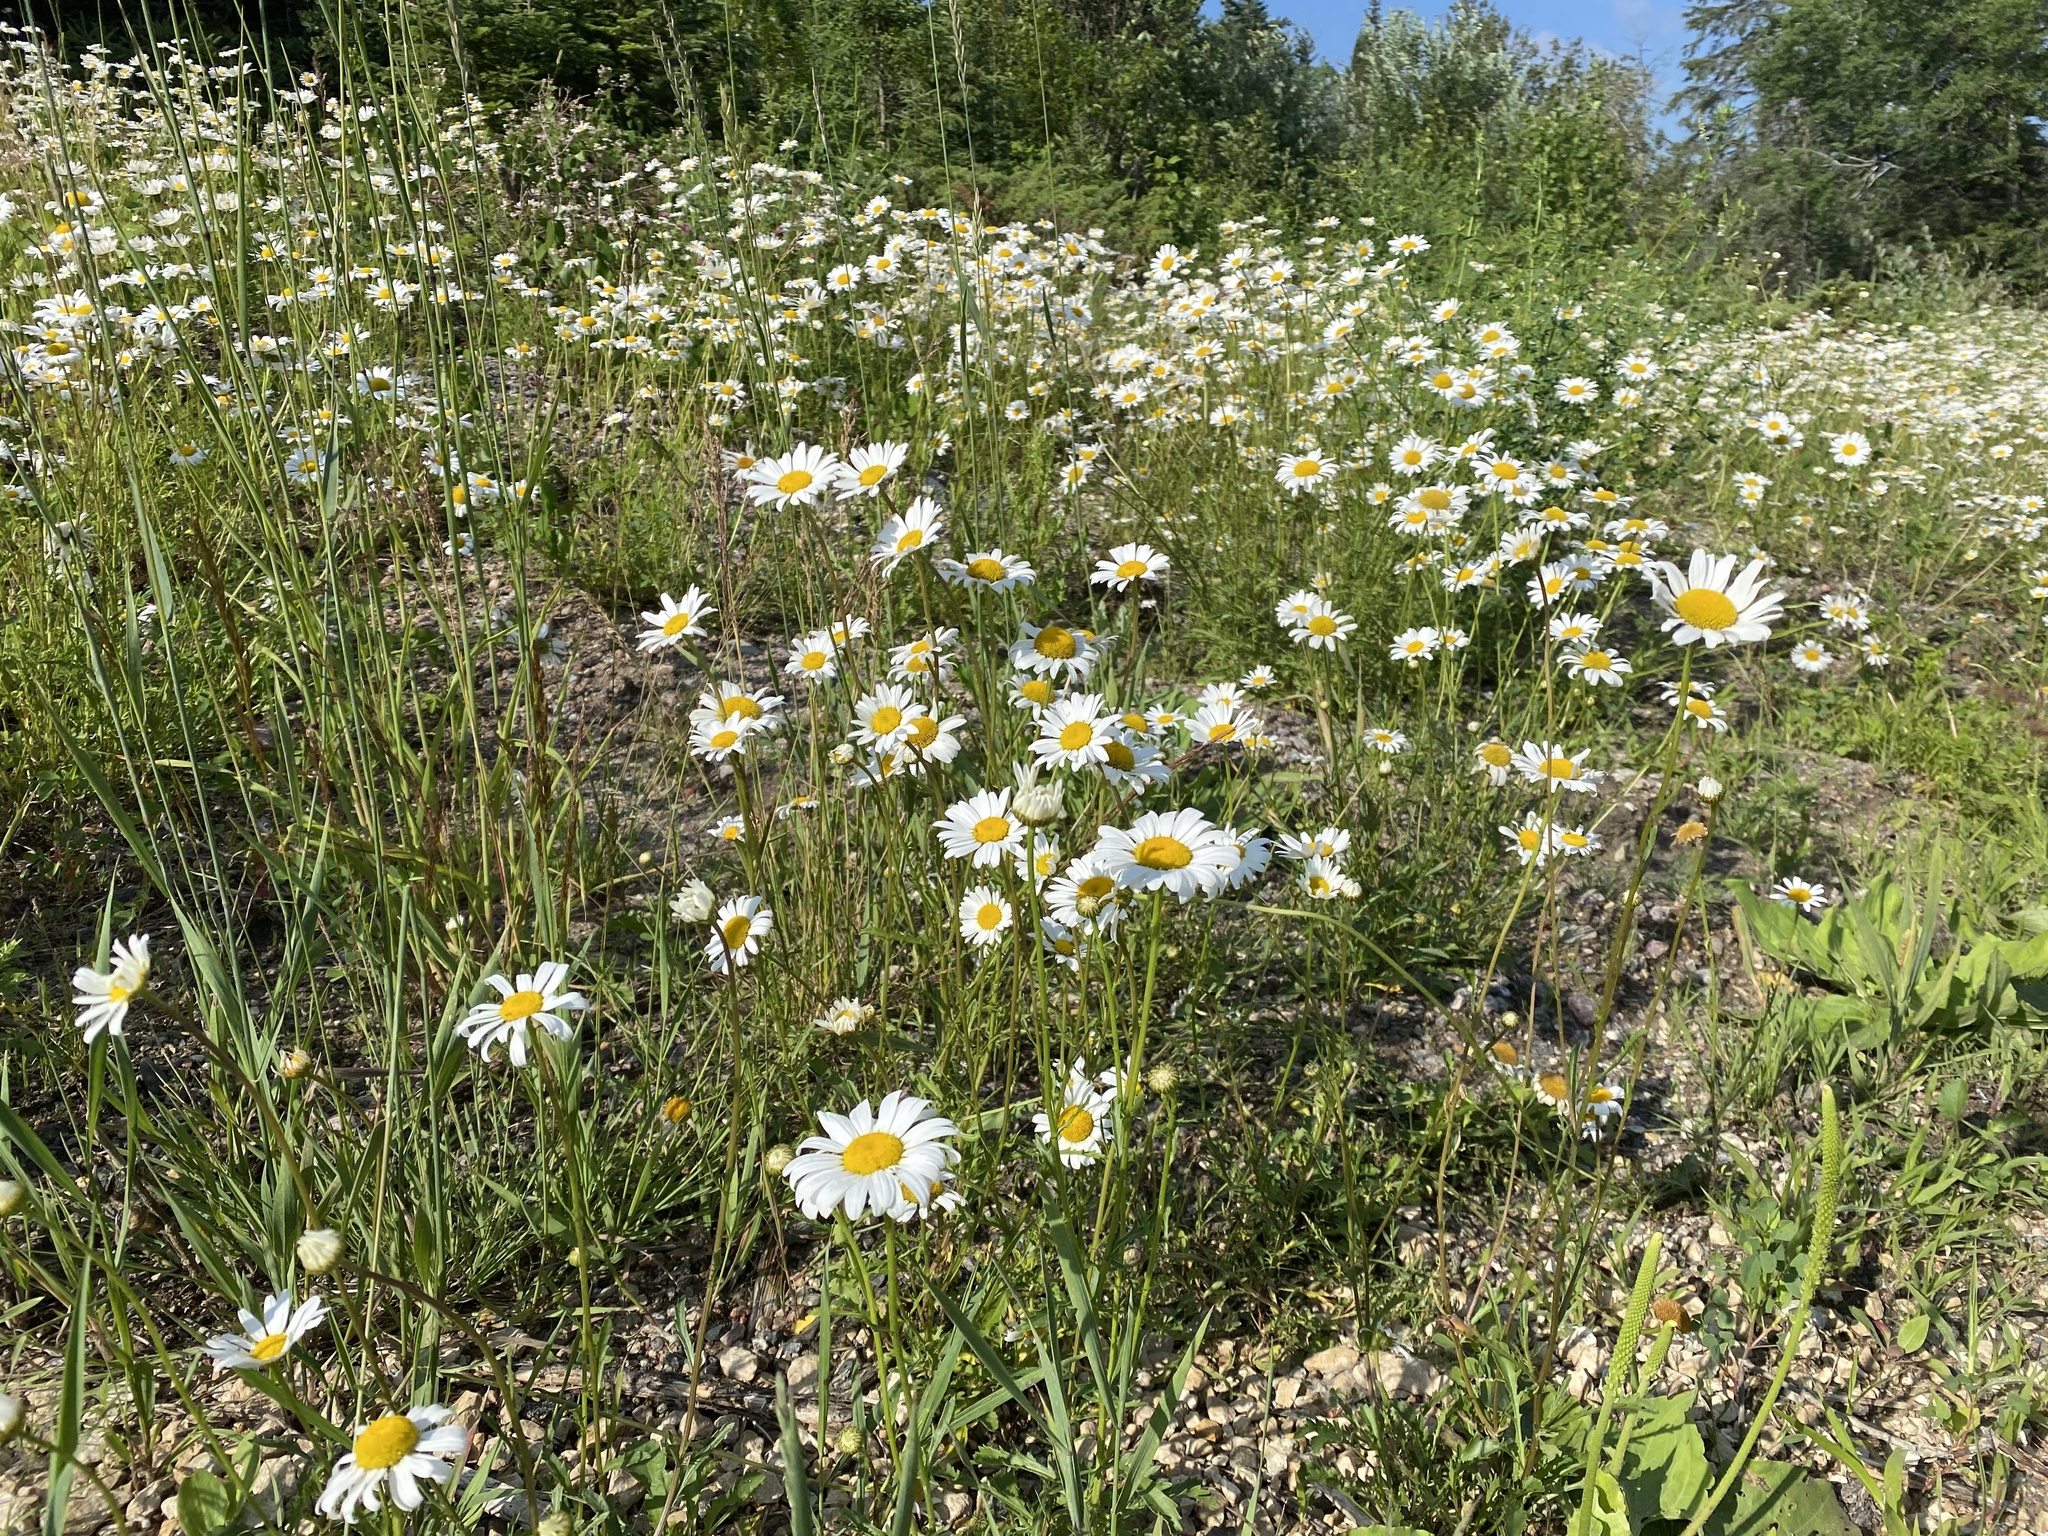 photo of Leucanthemum vulgare / oxeye daisy in Whiteshell Prov Park Manitoba MB. Photo by cwgspeirs via iNaturalist CC BY-NC